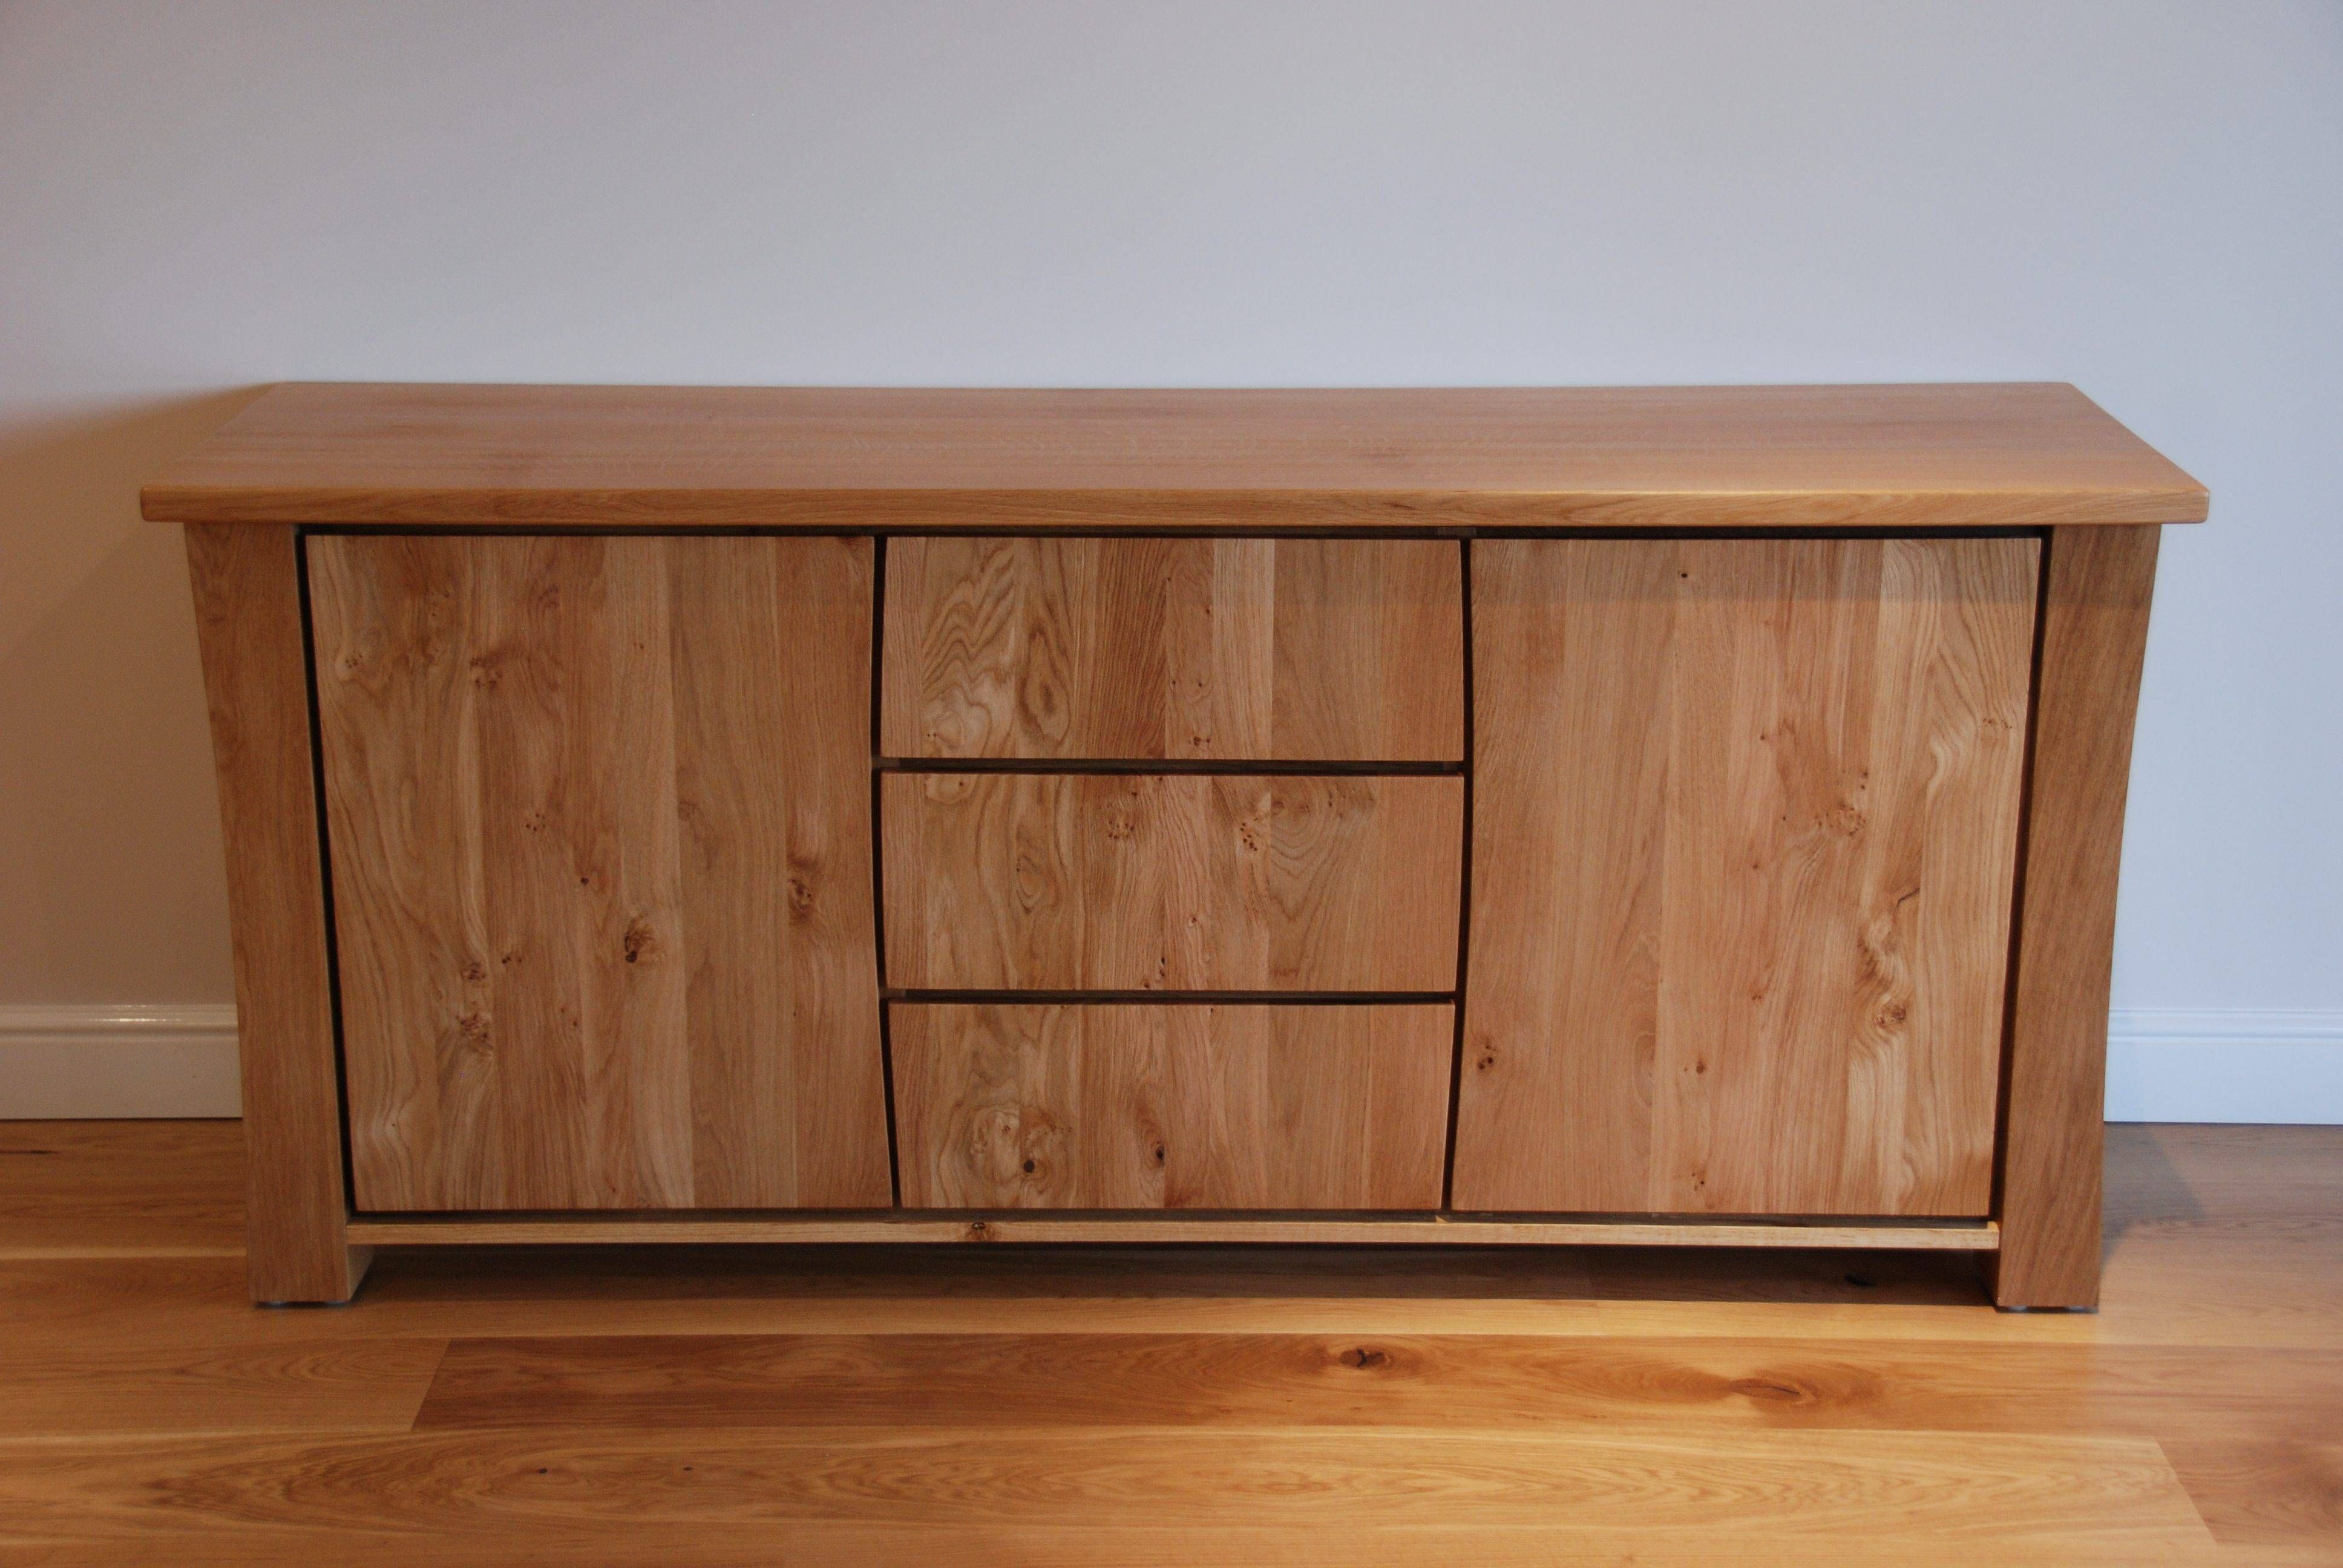 Sideboard And Tv Unit Commission | Bespokegreenoak Pertaining To Sideboards Units (View 15 of 15)